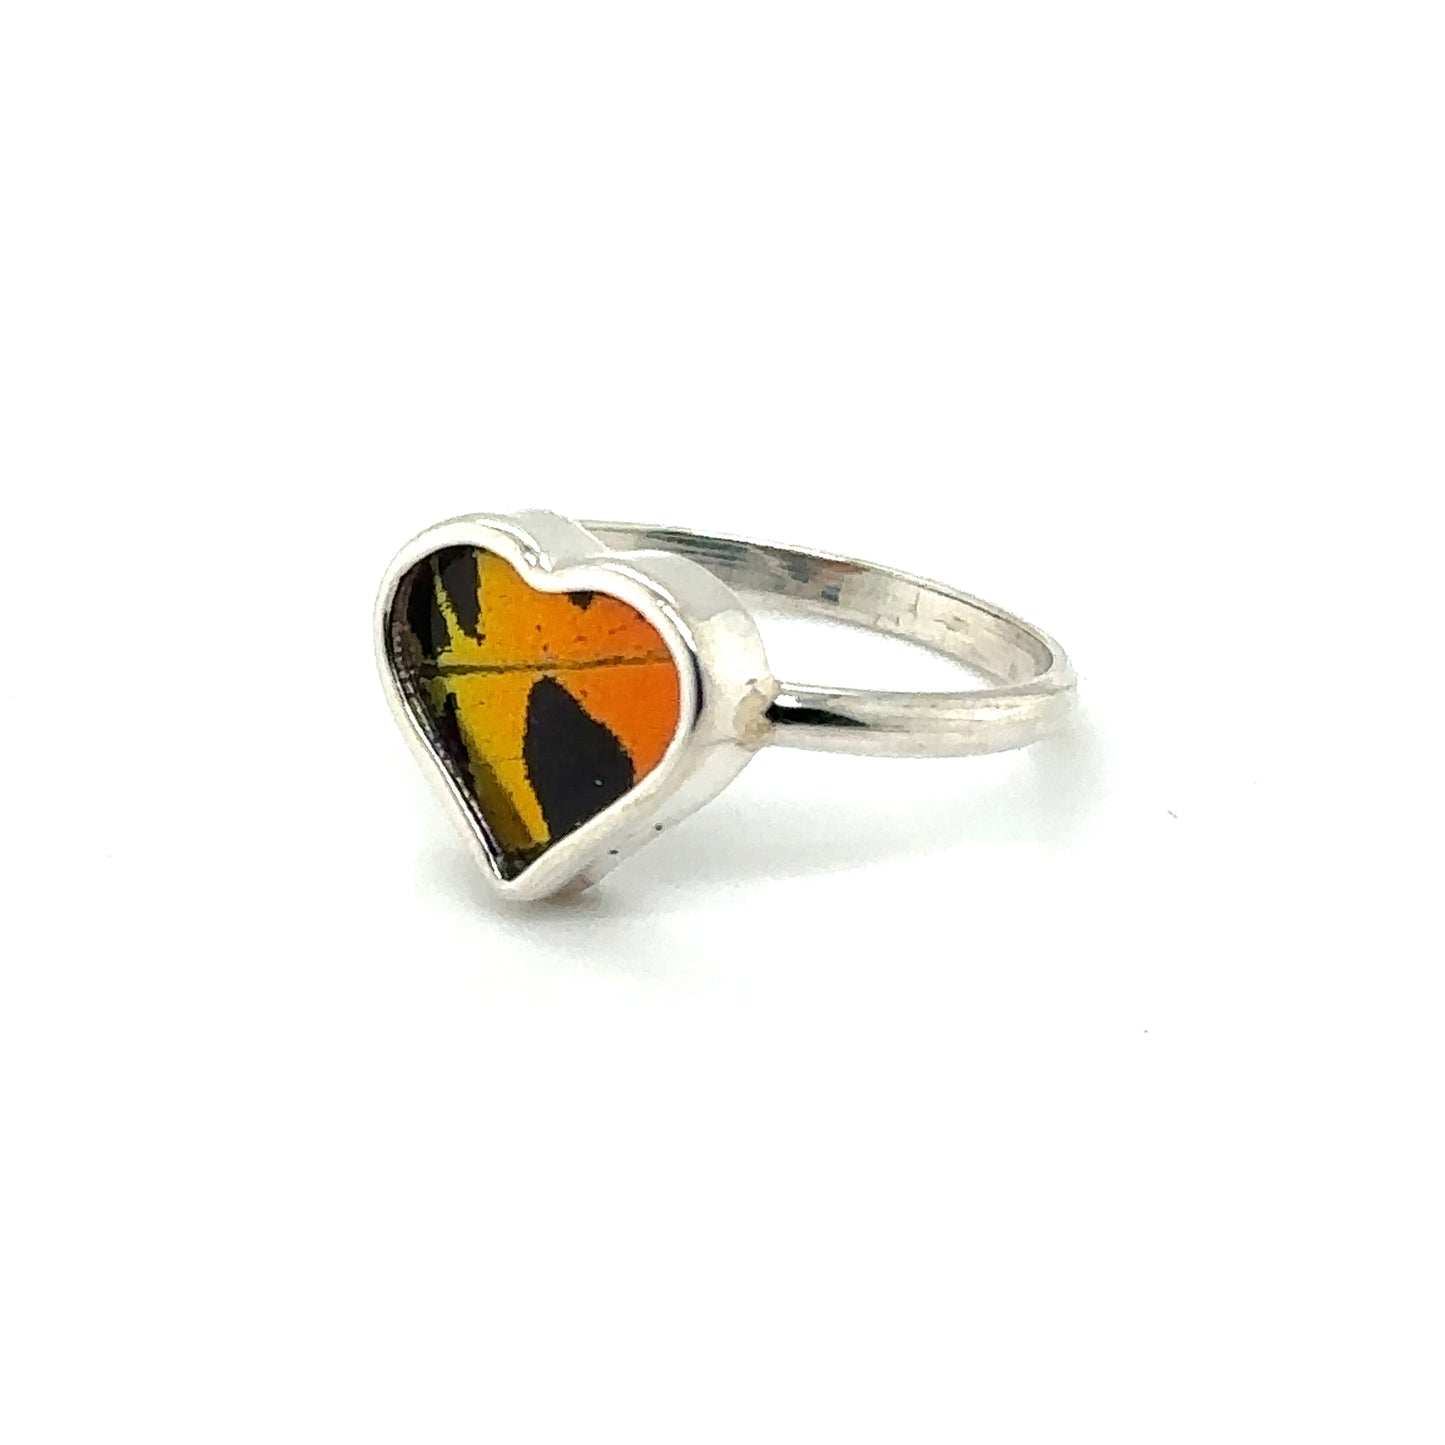 A Genuine Butterfly Ring in Heart Shape with an orange and yellow heart.